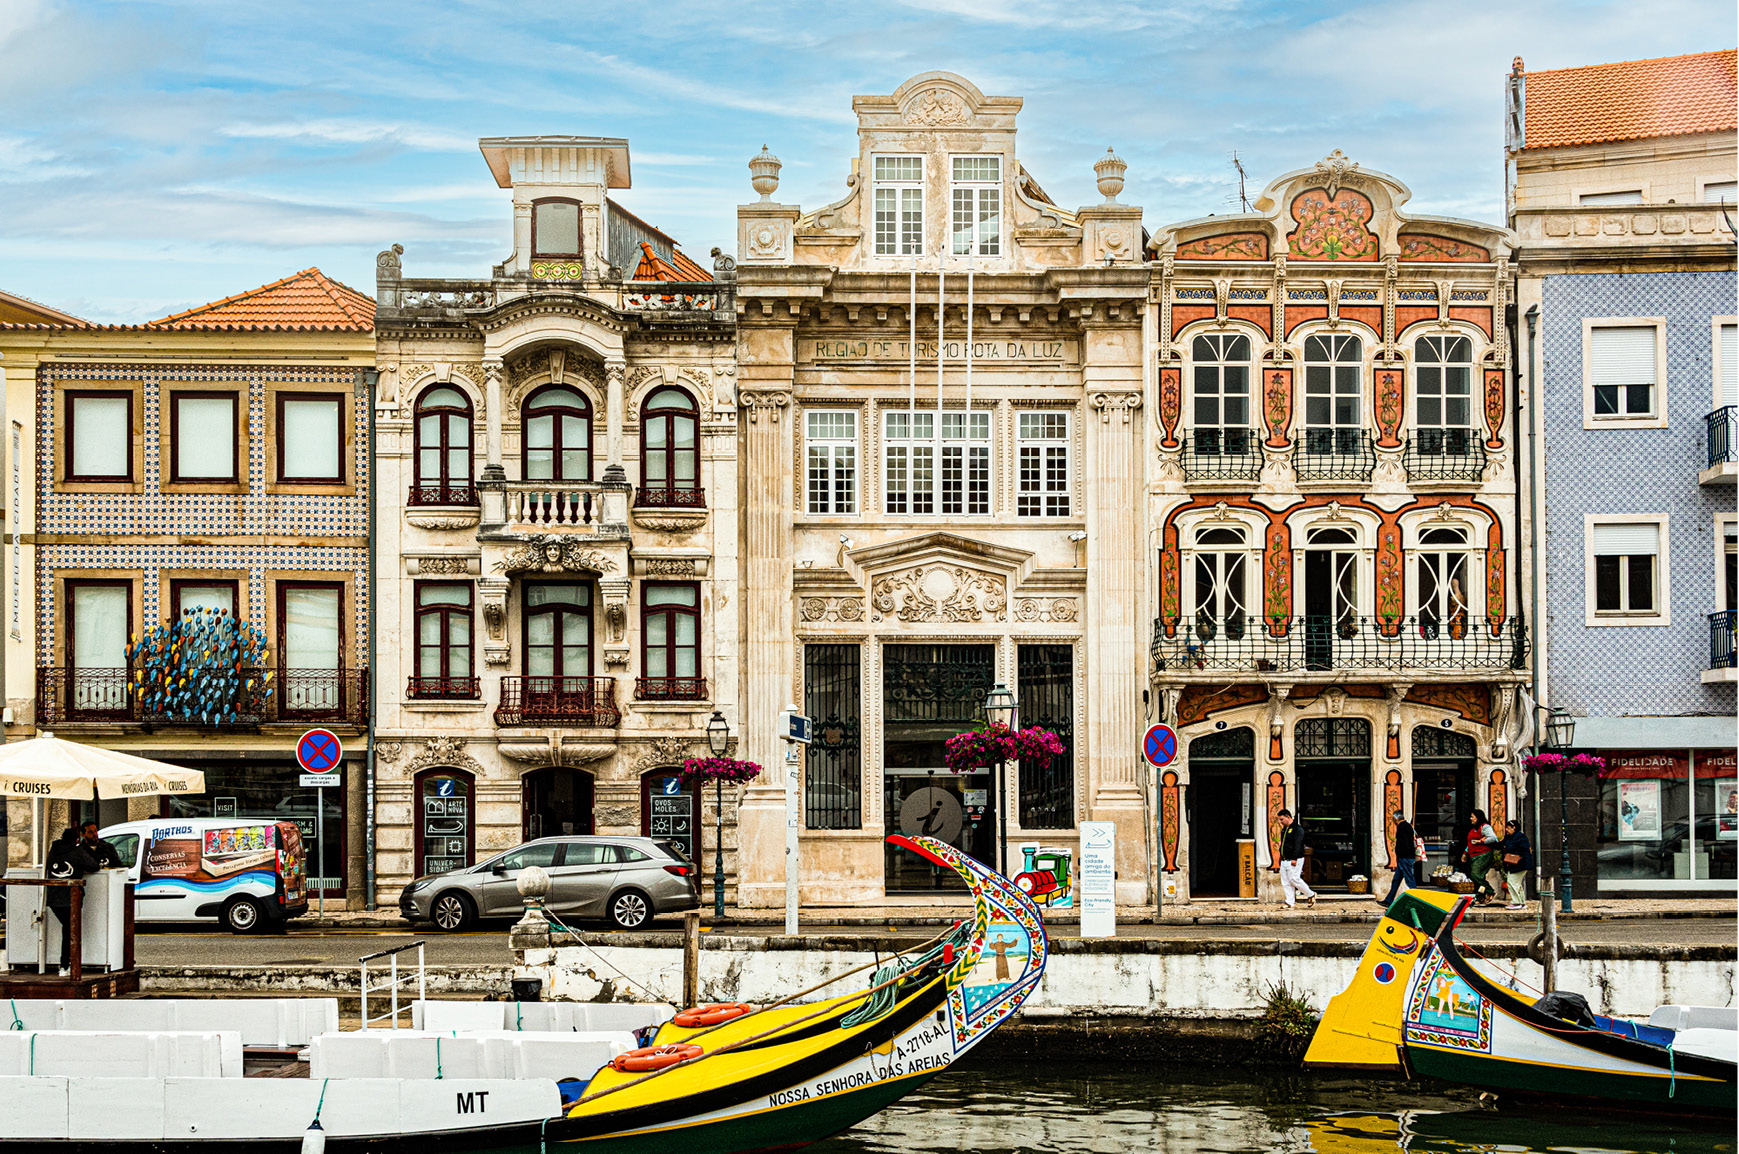 Canals, colorful boats, and Art Nouveau architecture draw visitors to Aveiro